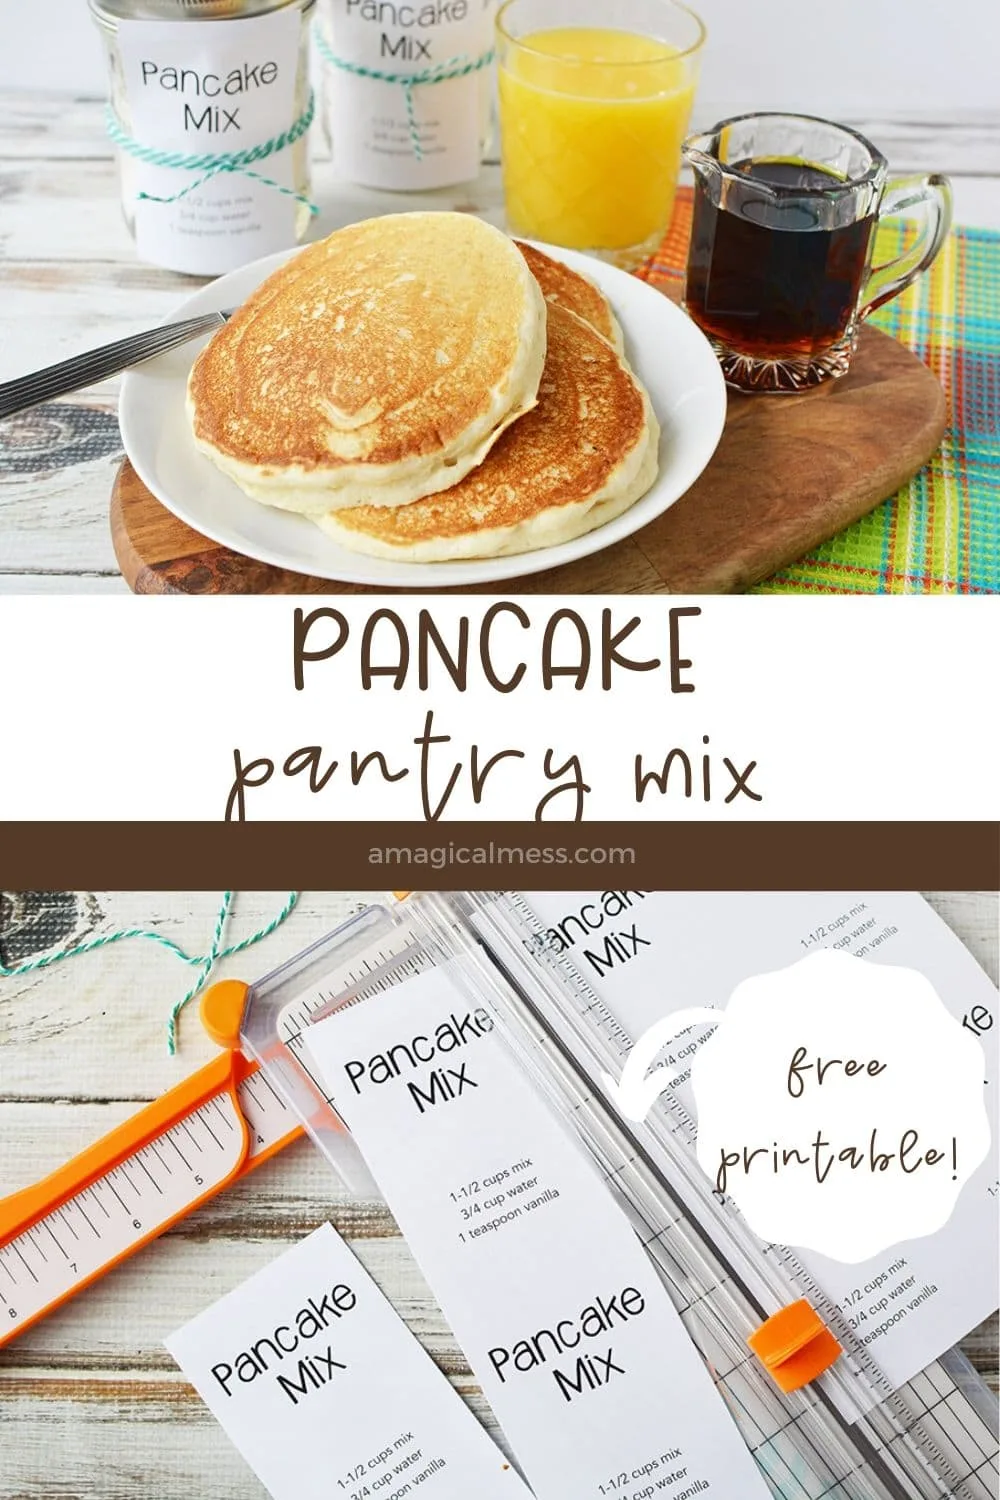 pancakes on plate with other breakfast foods